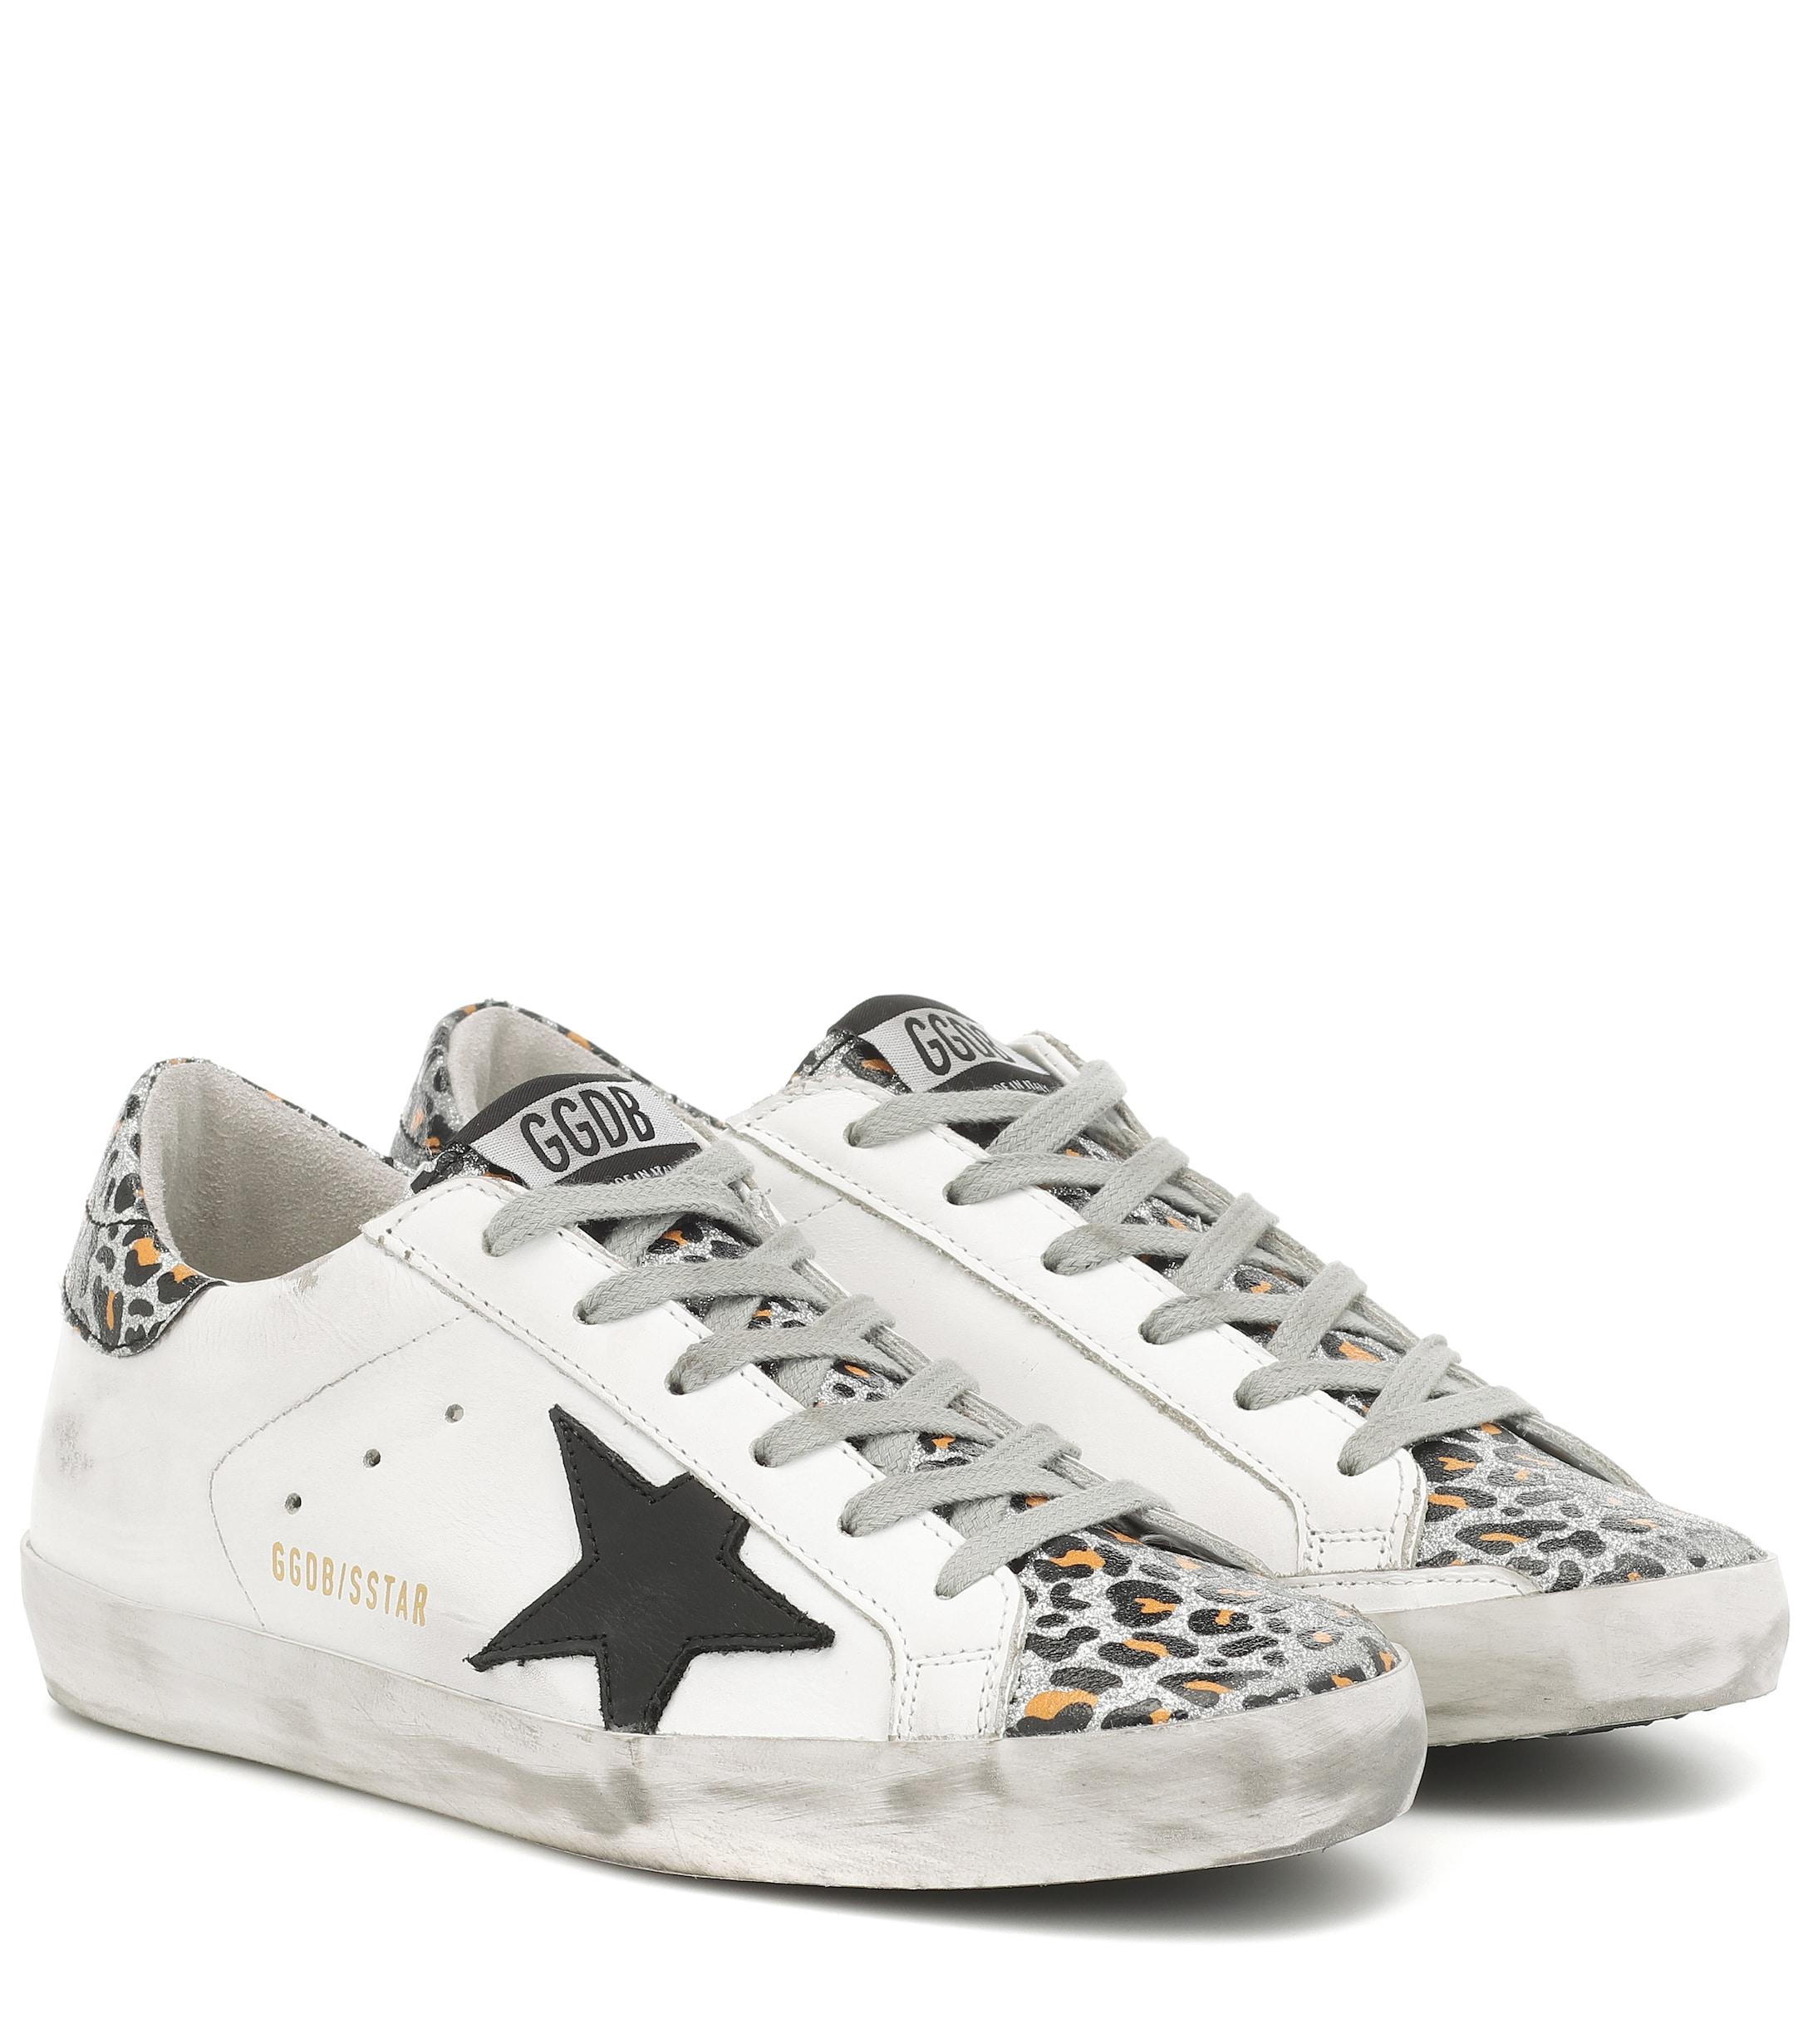 Golden Goose Deluxe Brand Goose Superstar Leather Sneakers in White - Lyst